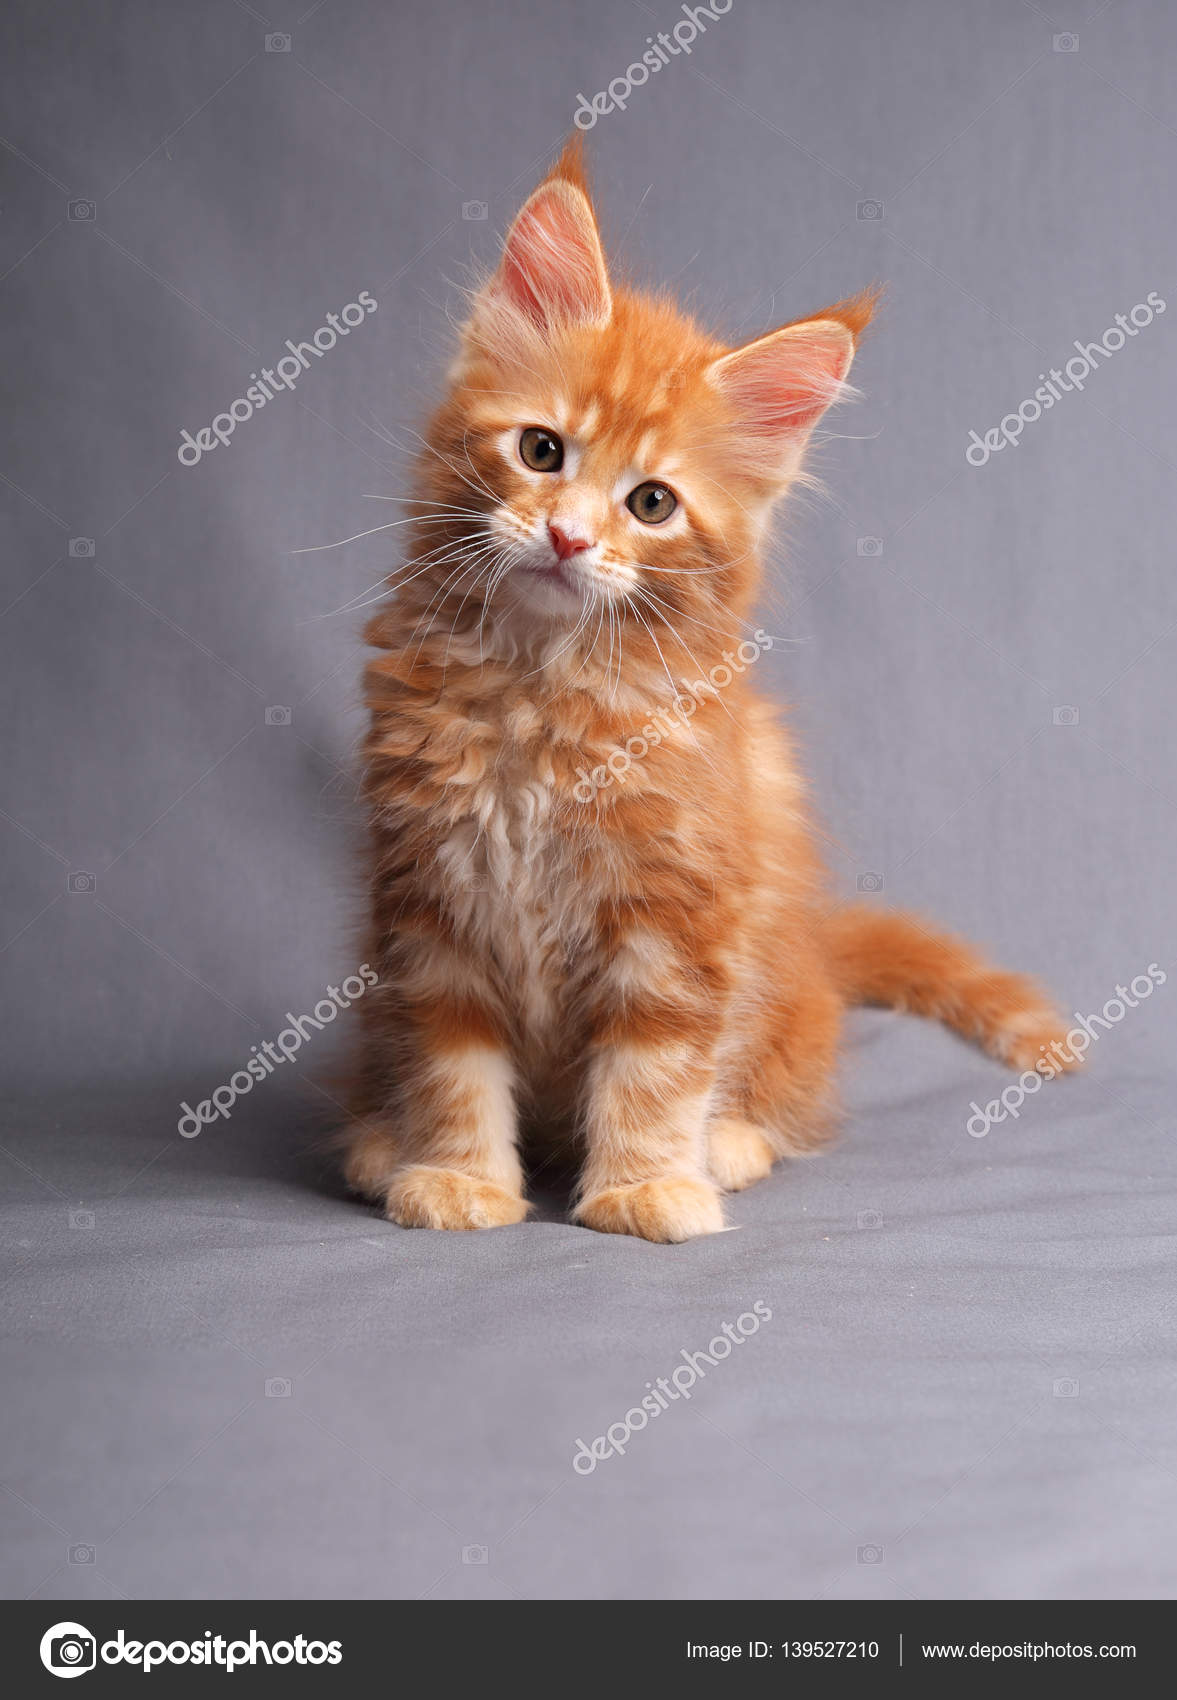 Funny adorable red solid maine coon kitten sitting with beautifu Stock Photo © nastia1983 #139527210